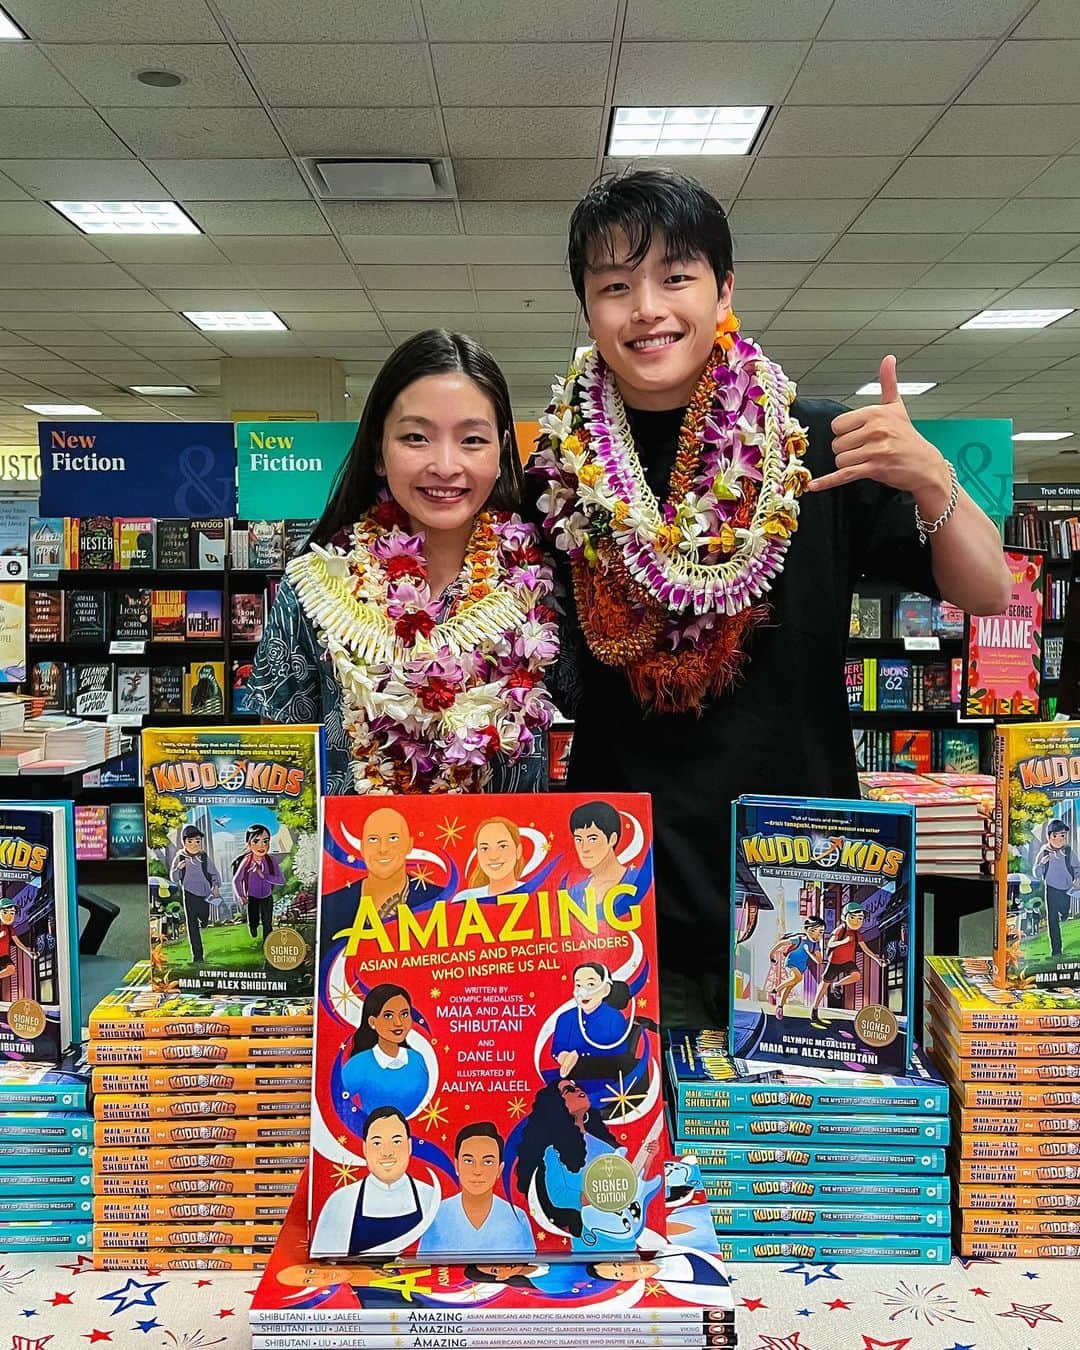 アレックス・シブタニのインスタグラム：「HONOLULU! MAHALO! ❤️🤙🌺🌸💐🌼📚✨  🔁 @maiashibutani • Yesterday’s #AmazingAAPI book tour kick-off event was incredible!   While I knew that it was going to be the first event of our Amazing: Asian Americans and Pacific Islanders Who Inspire Us All book tour, I realized when we arrived at @bnalamoana that it was ALSO our first public book event ever! *Our #KudoKids books came out during the height of the pandemic in 2020 and 2021 when in-person events were not possible.  The event started at 2pm and we didn’t end up leaving the store until after 7pm. To all of our friends and supporters, THANK YOU for taking the time to come out and see us. Standing in line were individuals, families, groups of friends, teachers (so many!), skaters (shoutout to the wonderful community at @icepalacehawaii), and fans who have been cheering us on since 2009! Many of you waited in line for over 3 hours!! We are so humbled and honored that the Honolulu community came out to support us and this book—special shoutout to @usjapancouncil, @jcchawaii, and @pigandthelady for spreading the word about our visit to the island.  Thank you for ALL of the beautiful leis, snacks, food recs, cards, and gifts. We enjoyed meeting and talking to each and every one of you. I especially appreciated the kind words about our books, skating, and thoughtful check-ins on my health. 🧡  Alex and I are really passionate and intentional about everything we do and believe in the power and possibilities of this new book, AMAZING. Our hope is that it can be a game changer for AAPI representation in kid’s literature, as well as advance the ongoing effort for AAPI history inclusion in K-12 curriculum across the United States.   To Haunani, Ross, and rest of the wonderful B&N staff, thank you for hosting us. The beautiful window display at @alamoanacenter was our FIRST and we will never forget it! 🤙  To Jenny, Dane, Aaliya, Opal, and the rest of the team at Viking + @penguinkids, thank you for your hard work and belief in this book. 🙏  To top it all off, part-way through our signing I got a very a special Twitter notification. More on that in my next post! 😉  The link to preorder AMAZING is in my bio! 🫶✨」